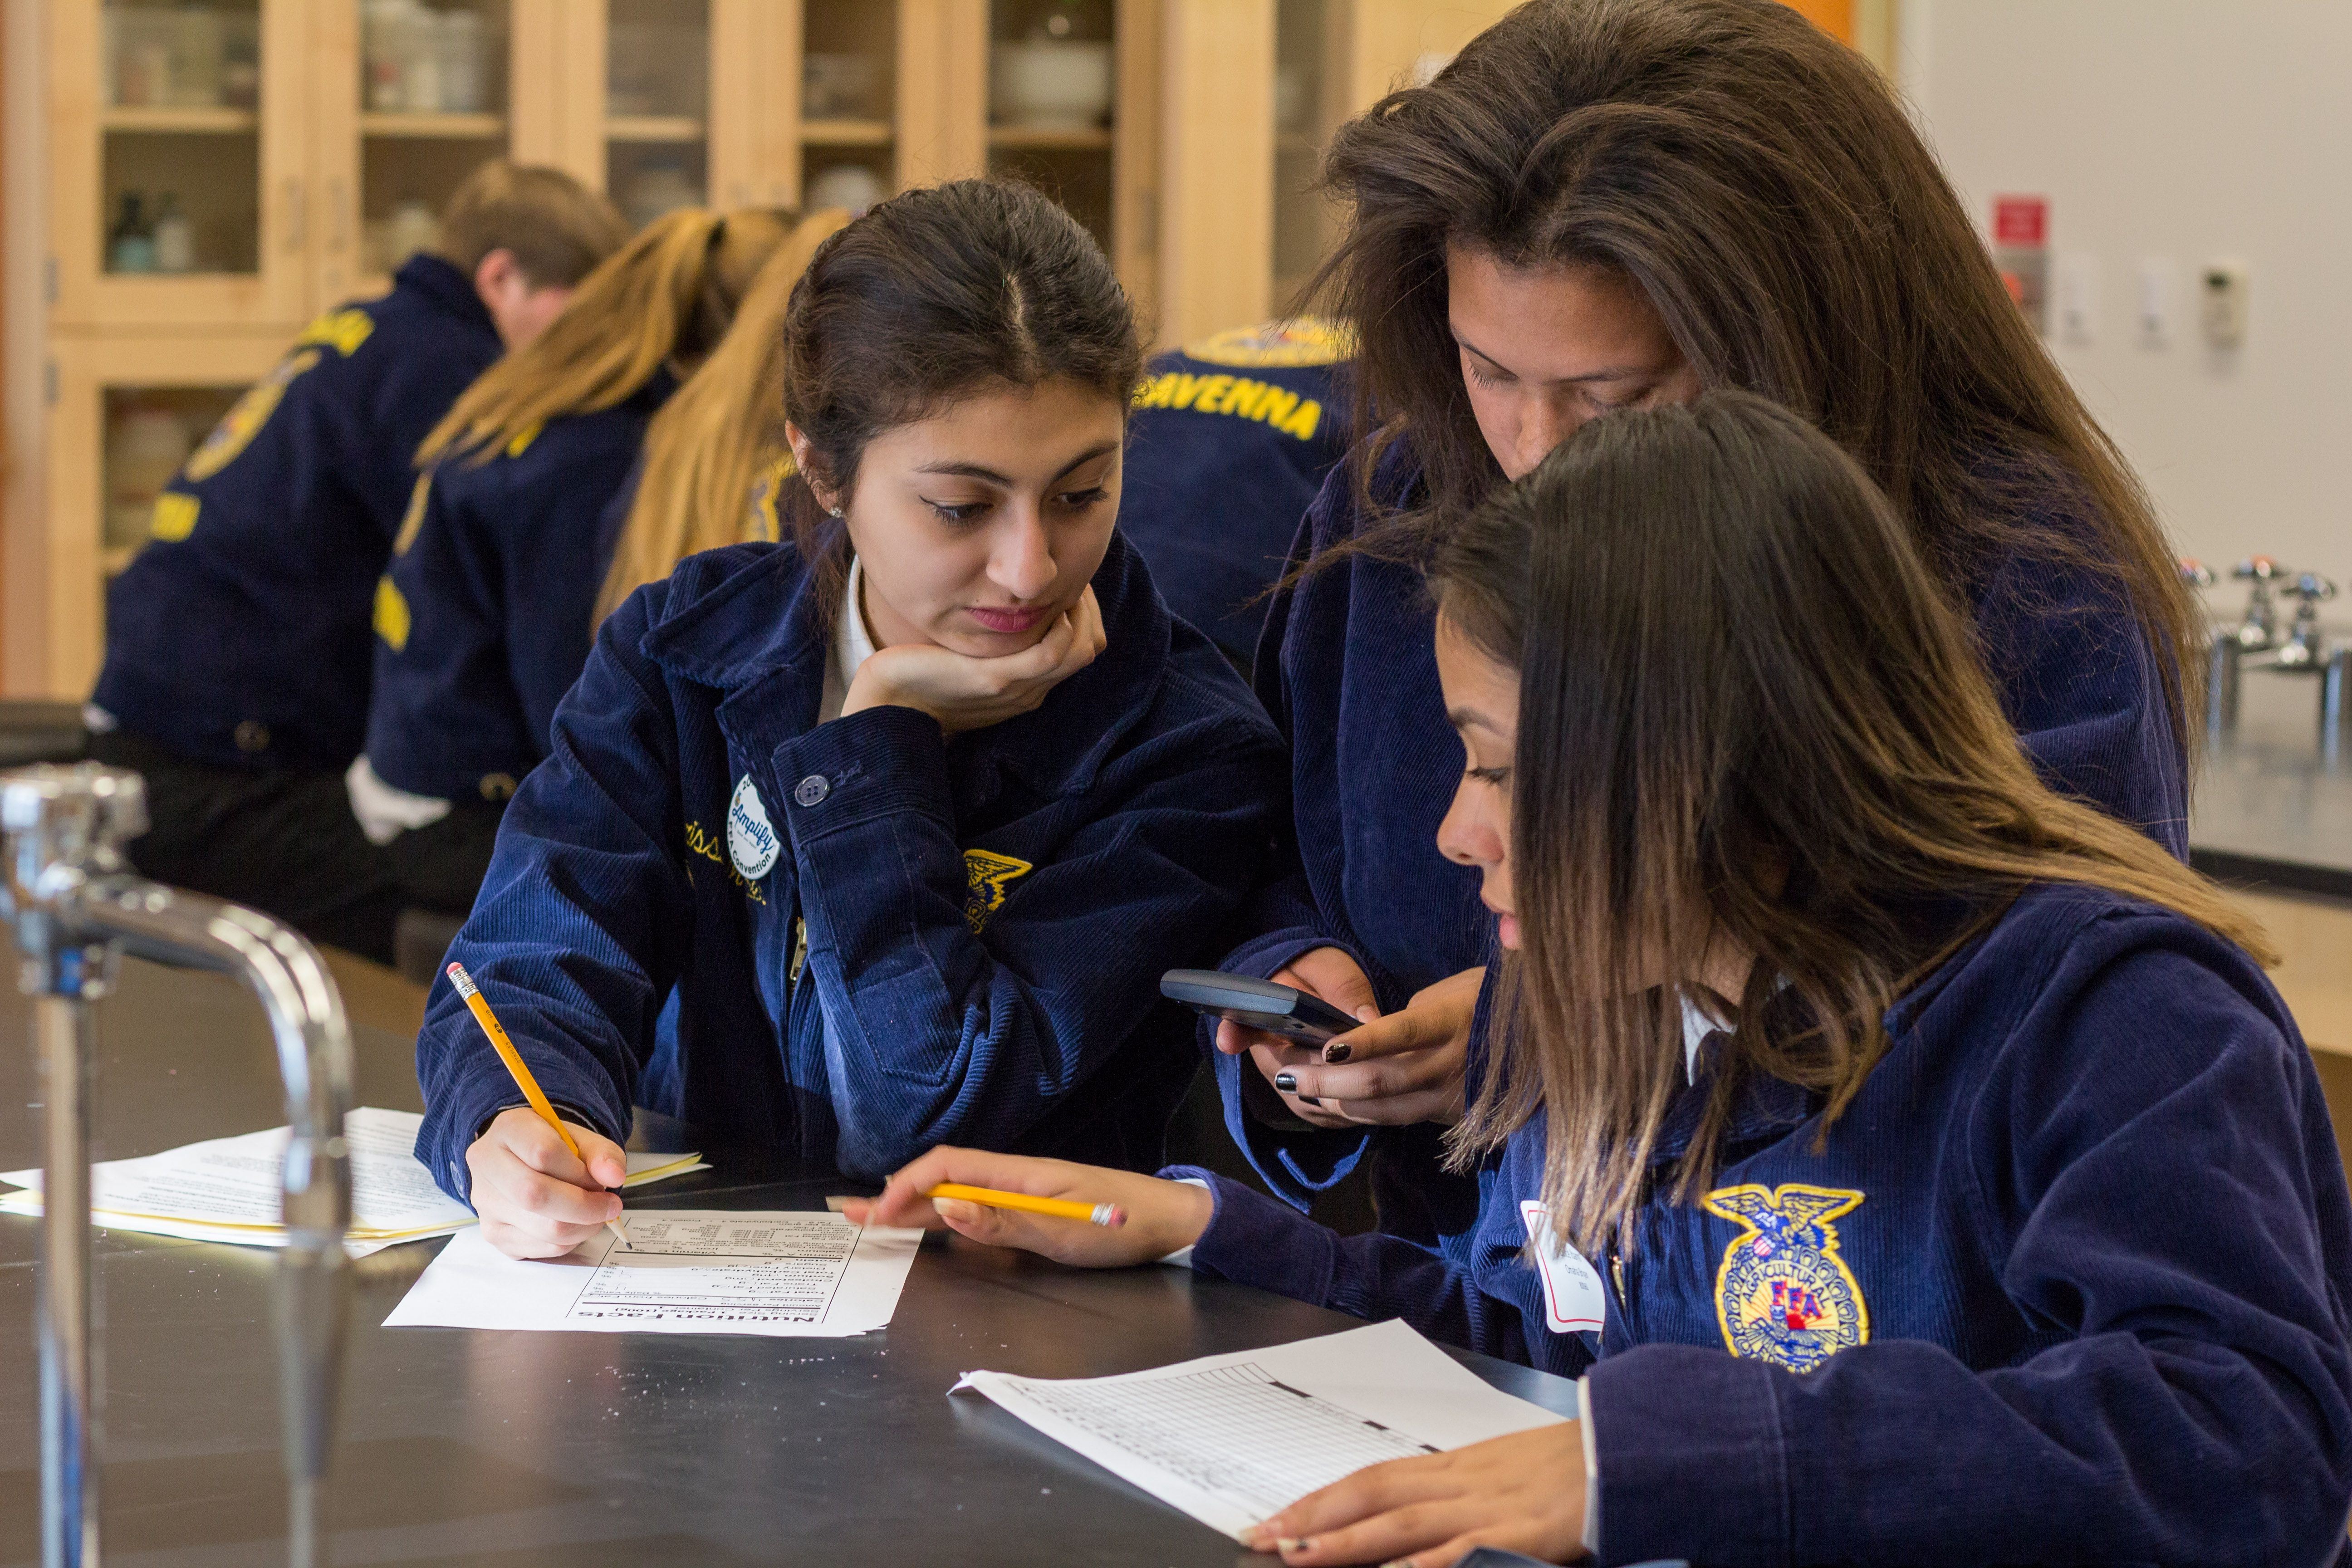 Stay up-to-date with the Nebraska FFA Foundation.